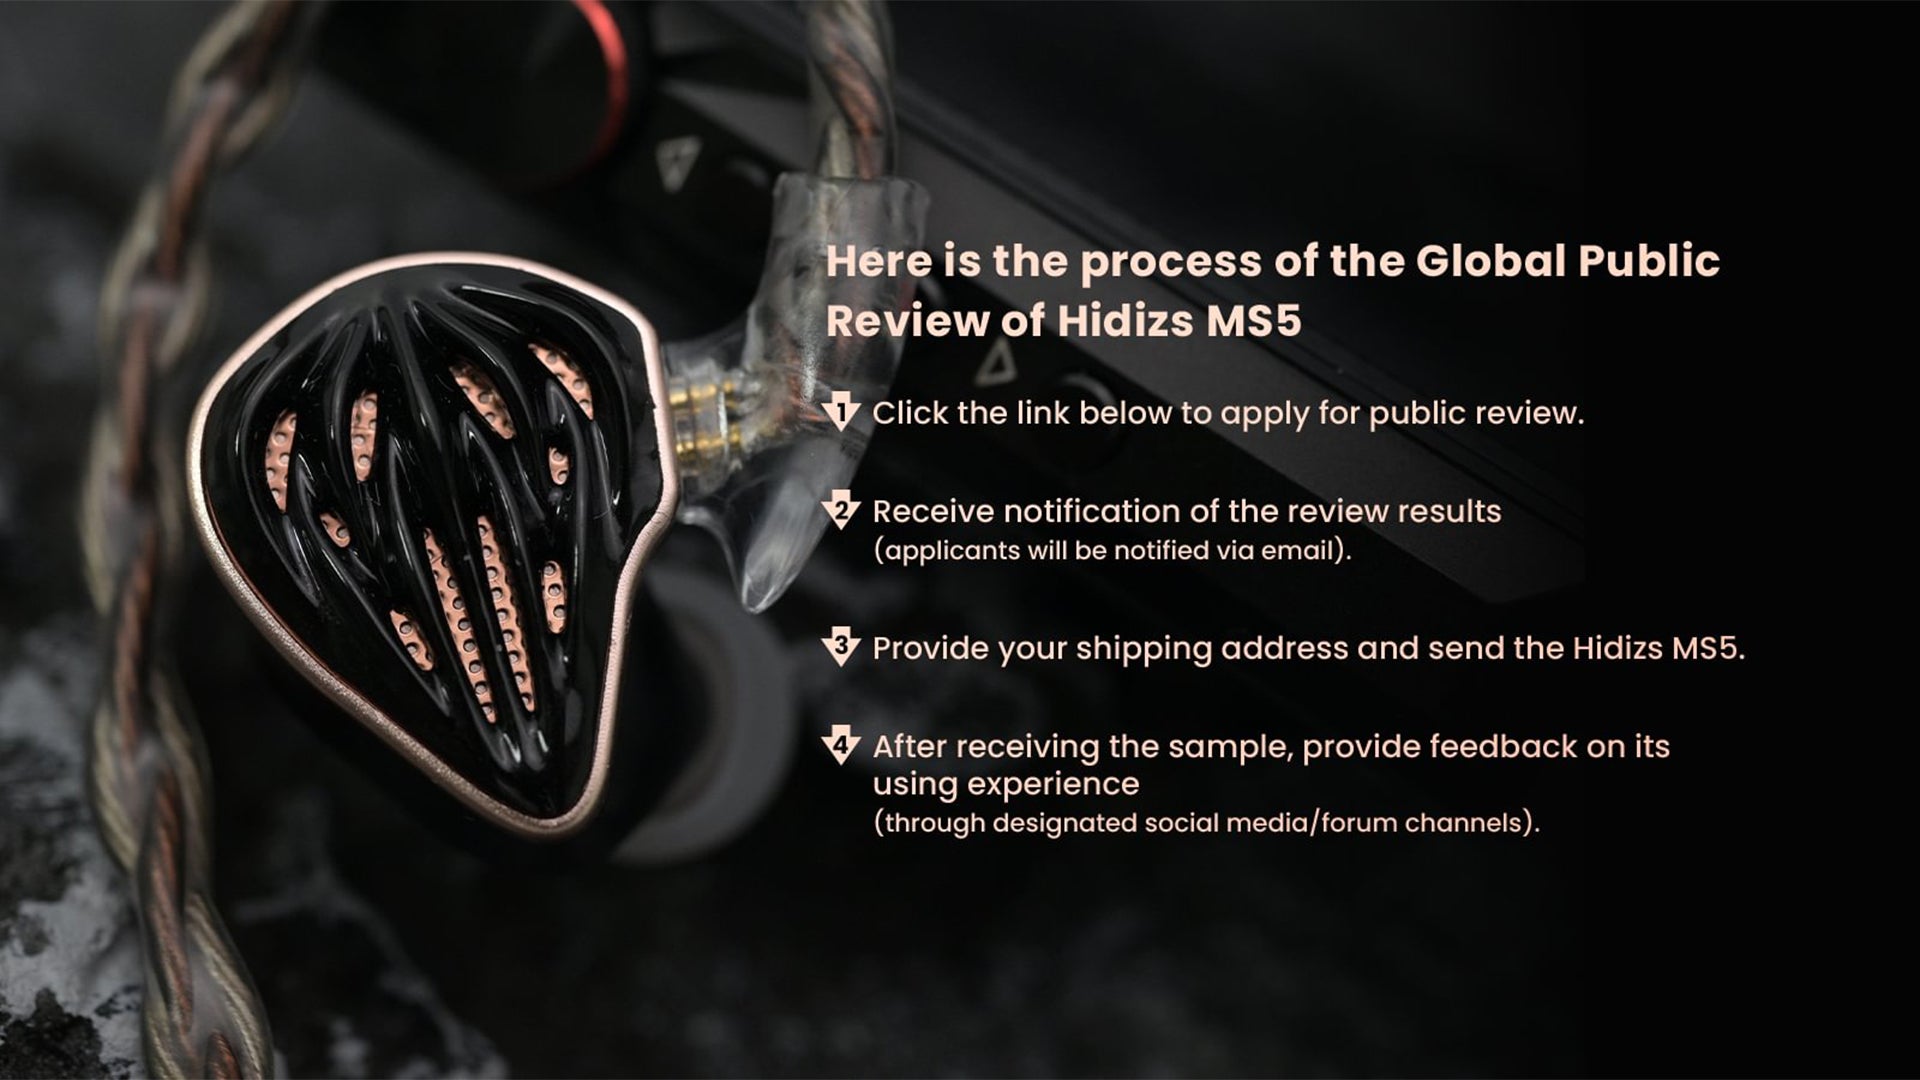 HIDIZS-JOIN_THE_FREE_GLOBAL_PUBLIC_REVIEW_OF_HIDIZS_MS5-PC-23031503